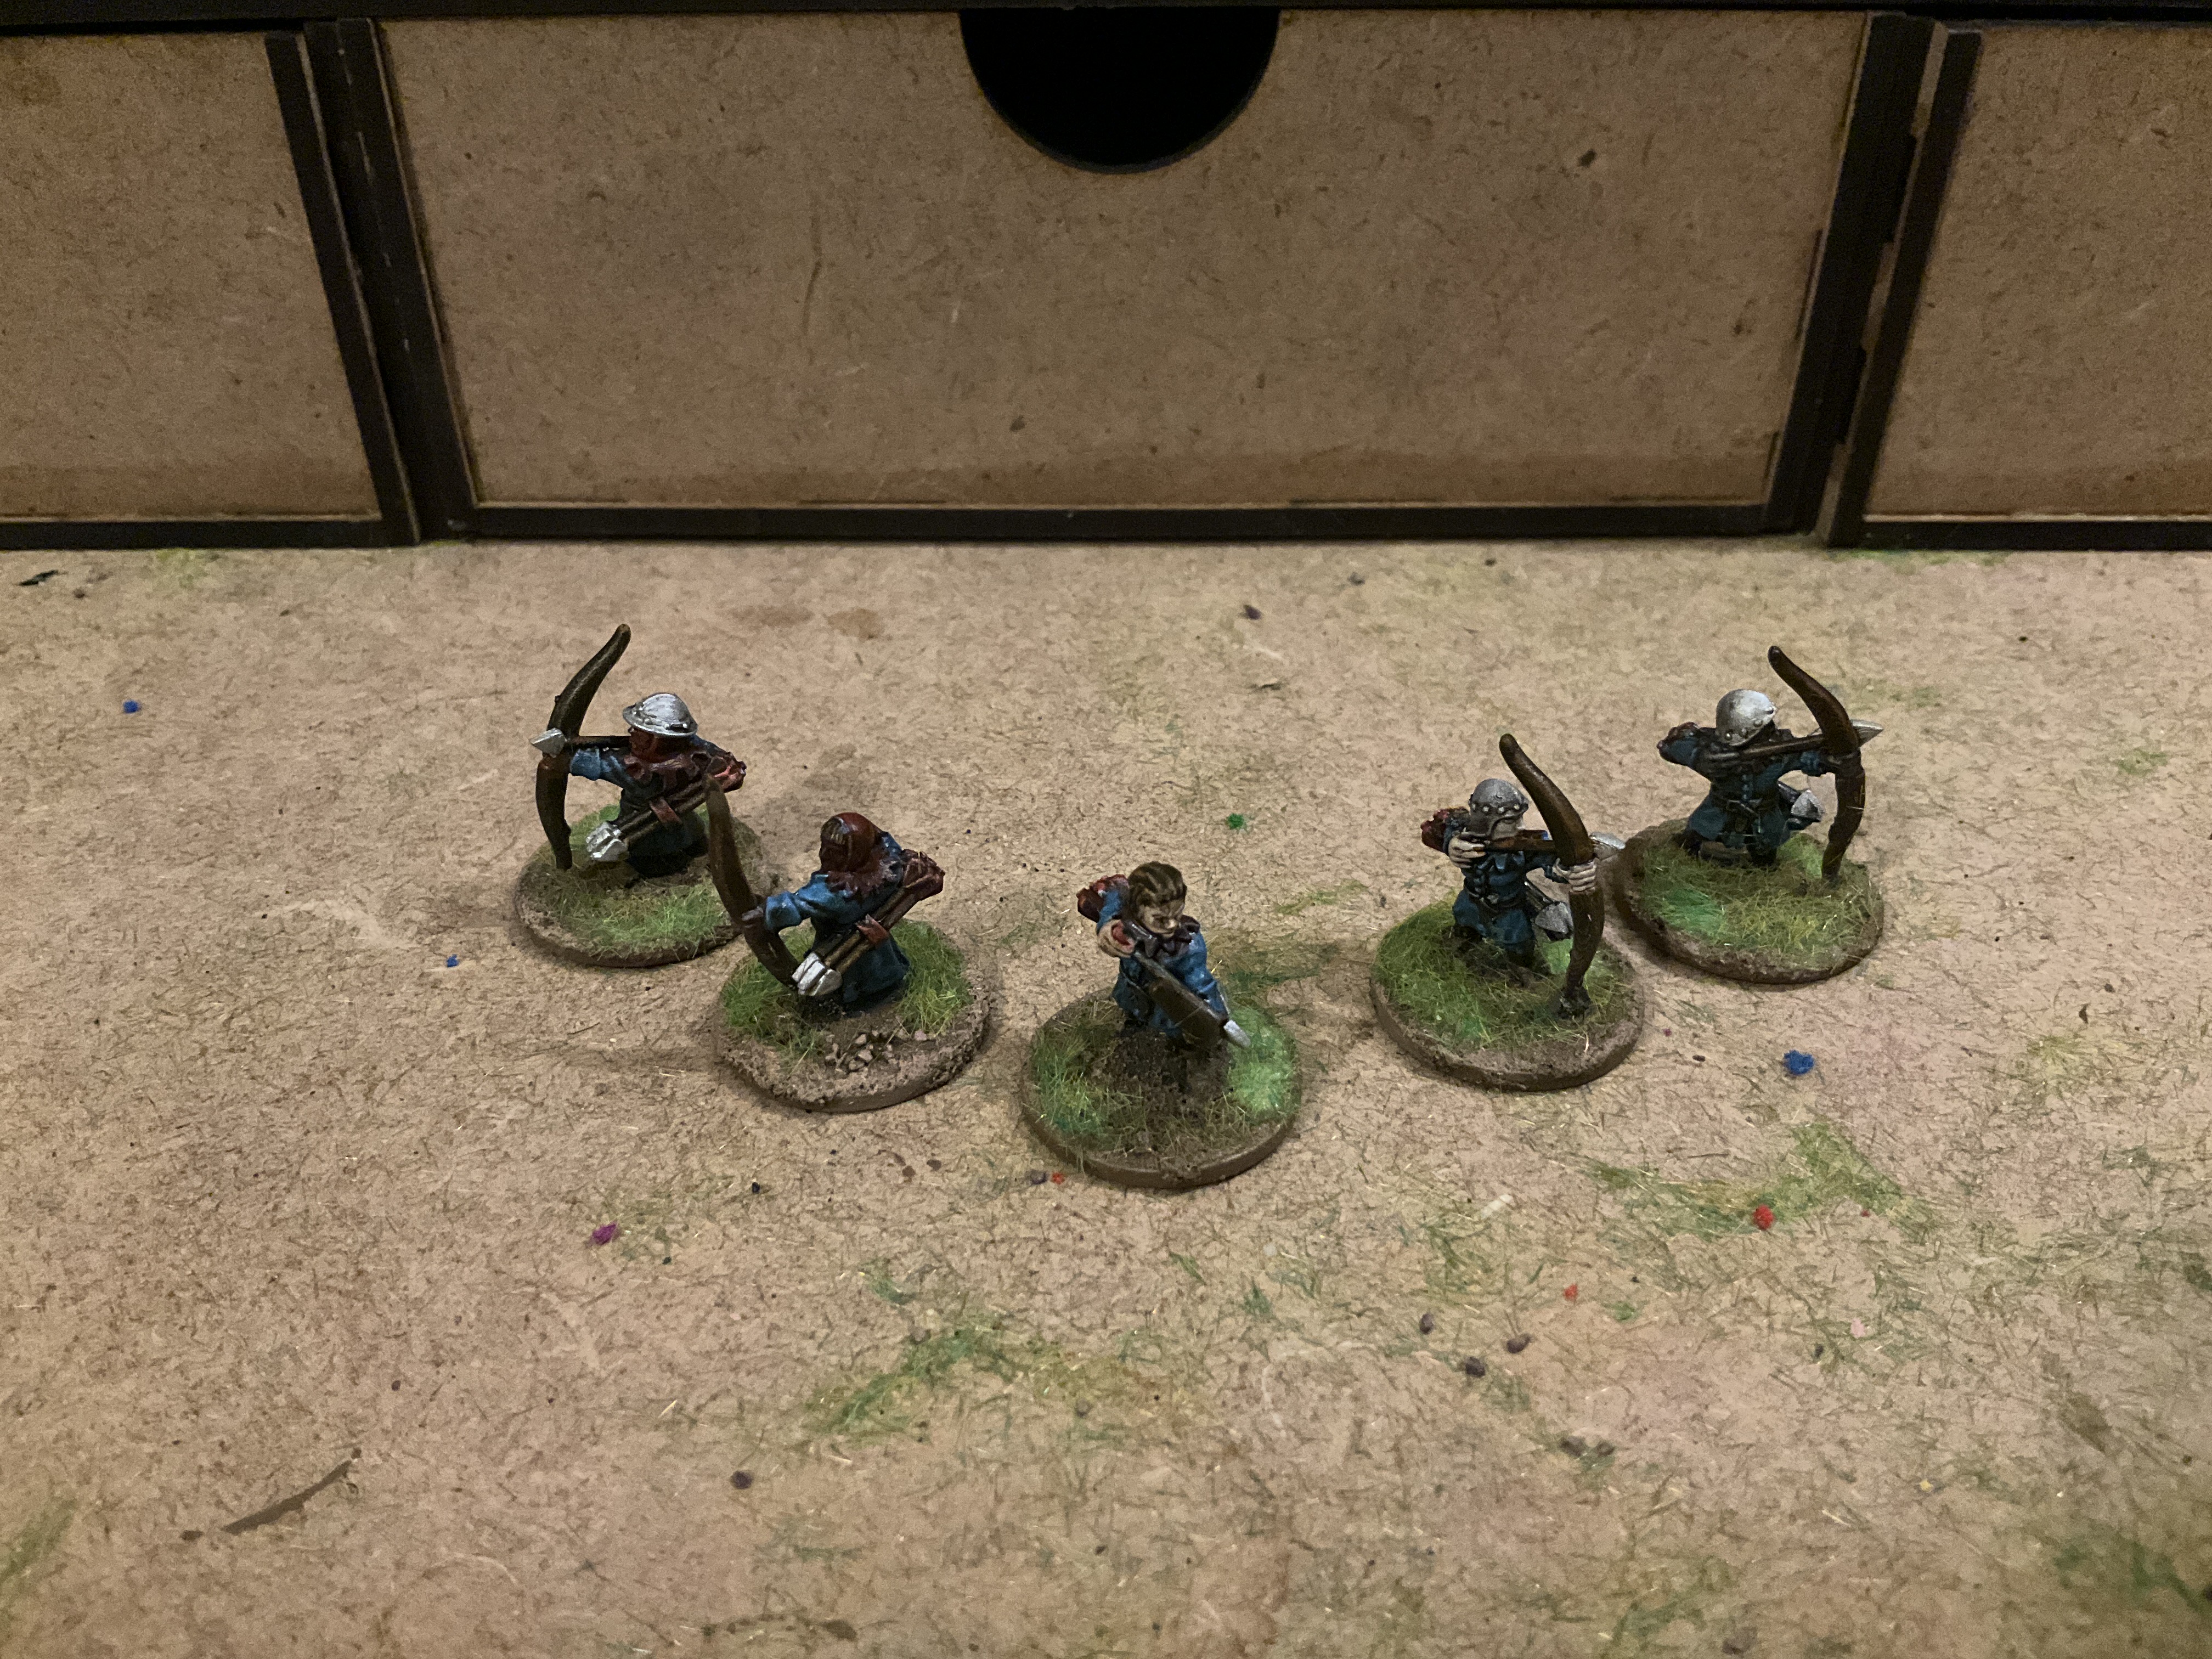 The finished archers